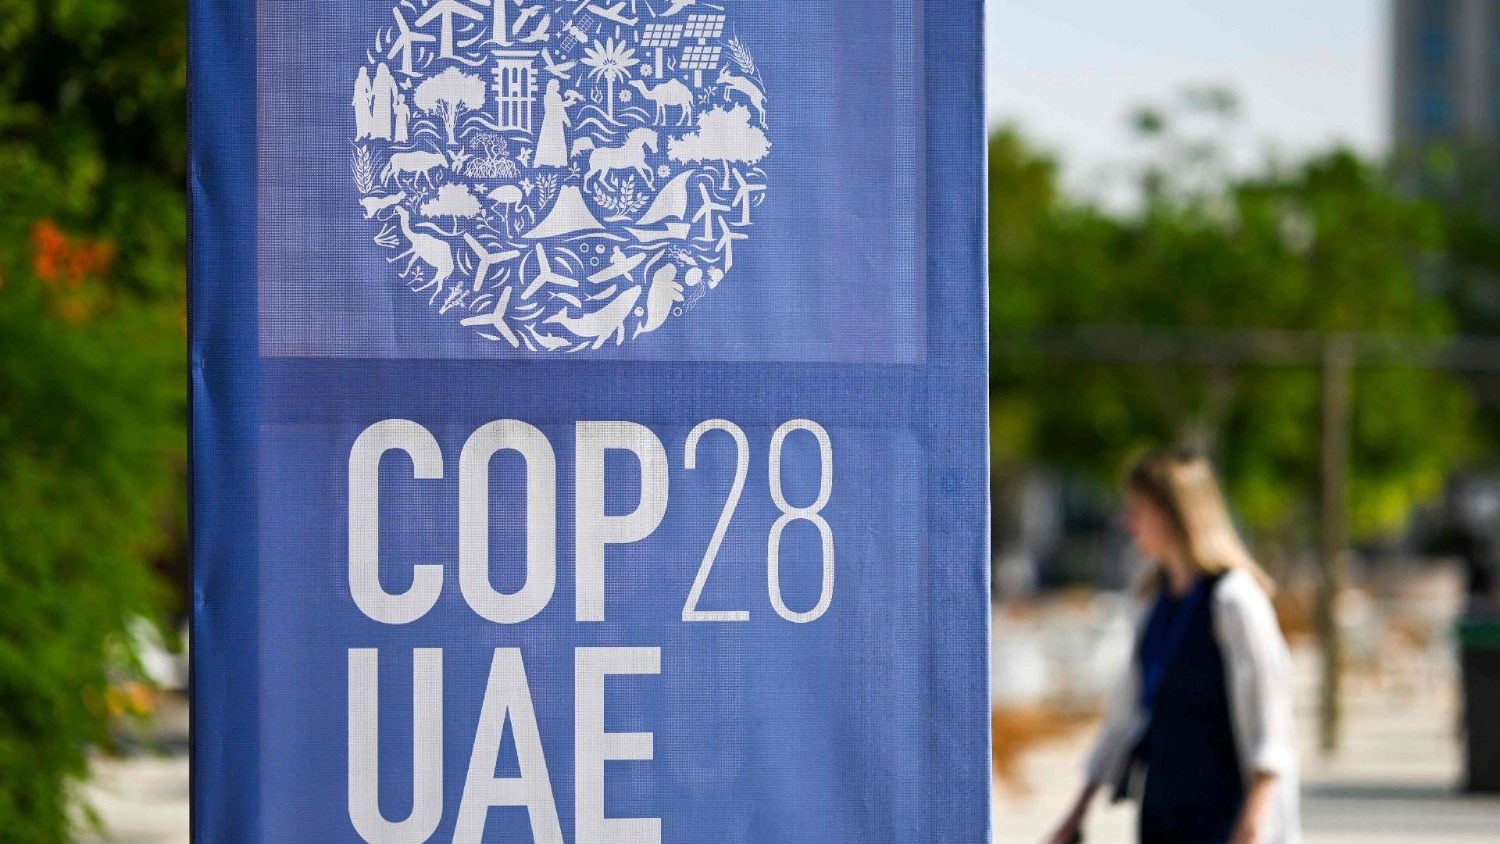 2023] Side Events at UN Climate Change Conference of the Parties (COP 28)